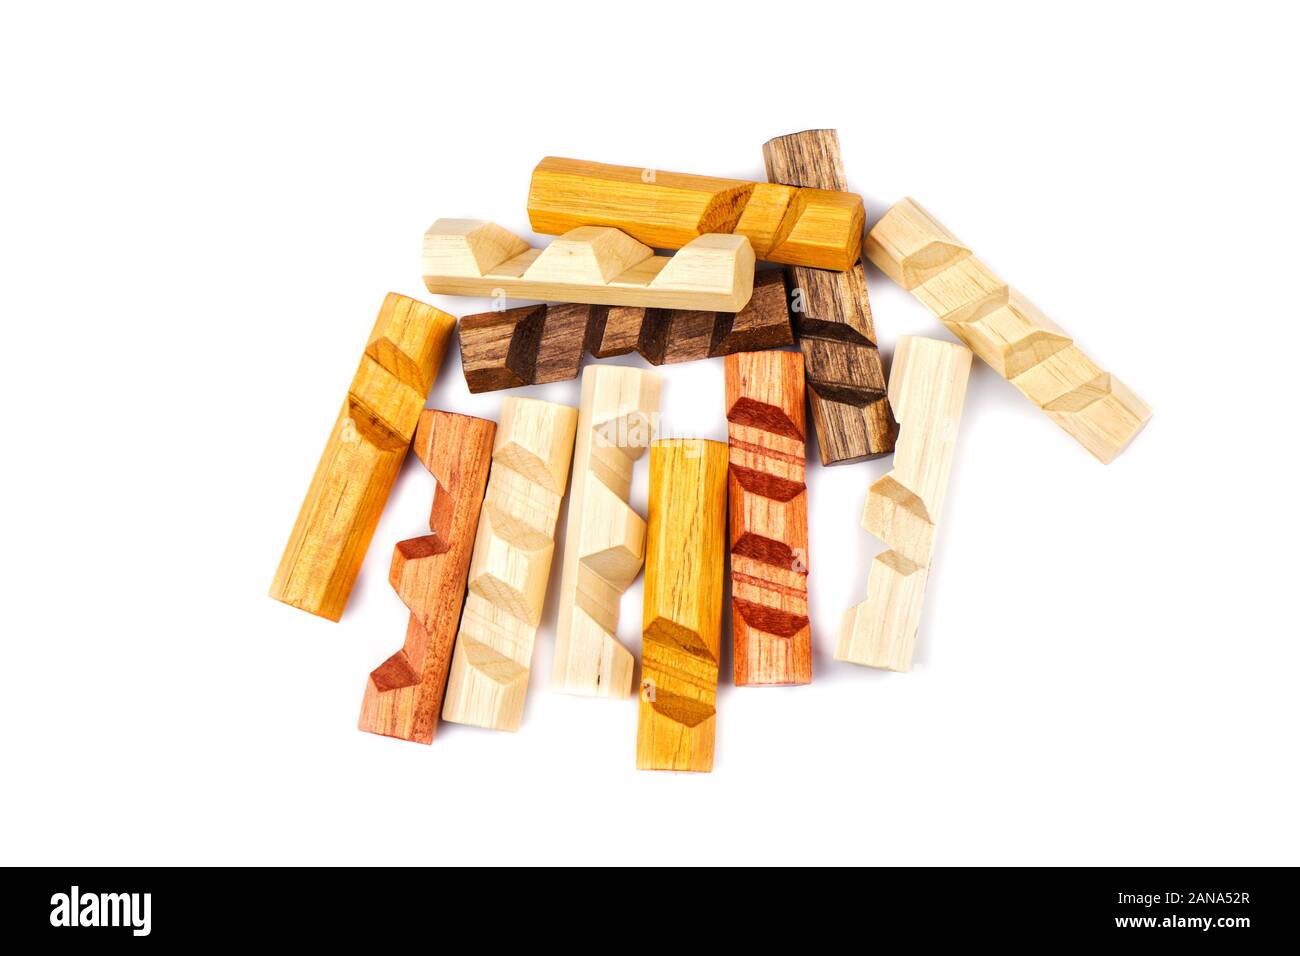 Wooden Pieces From A Hexagon Spike Puzzle Isolated On A White Background  Stock Photo - Download Image Now - iStock